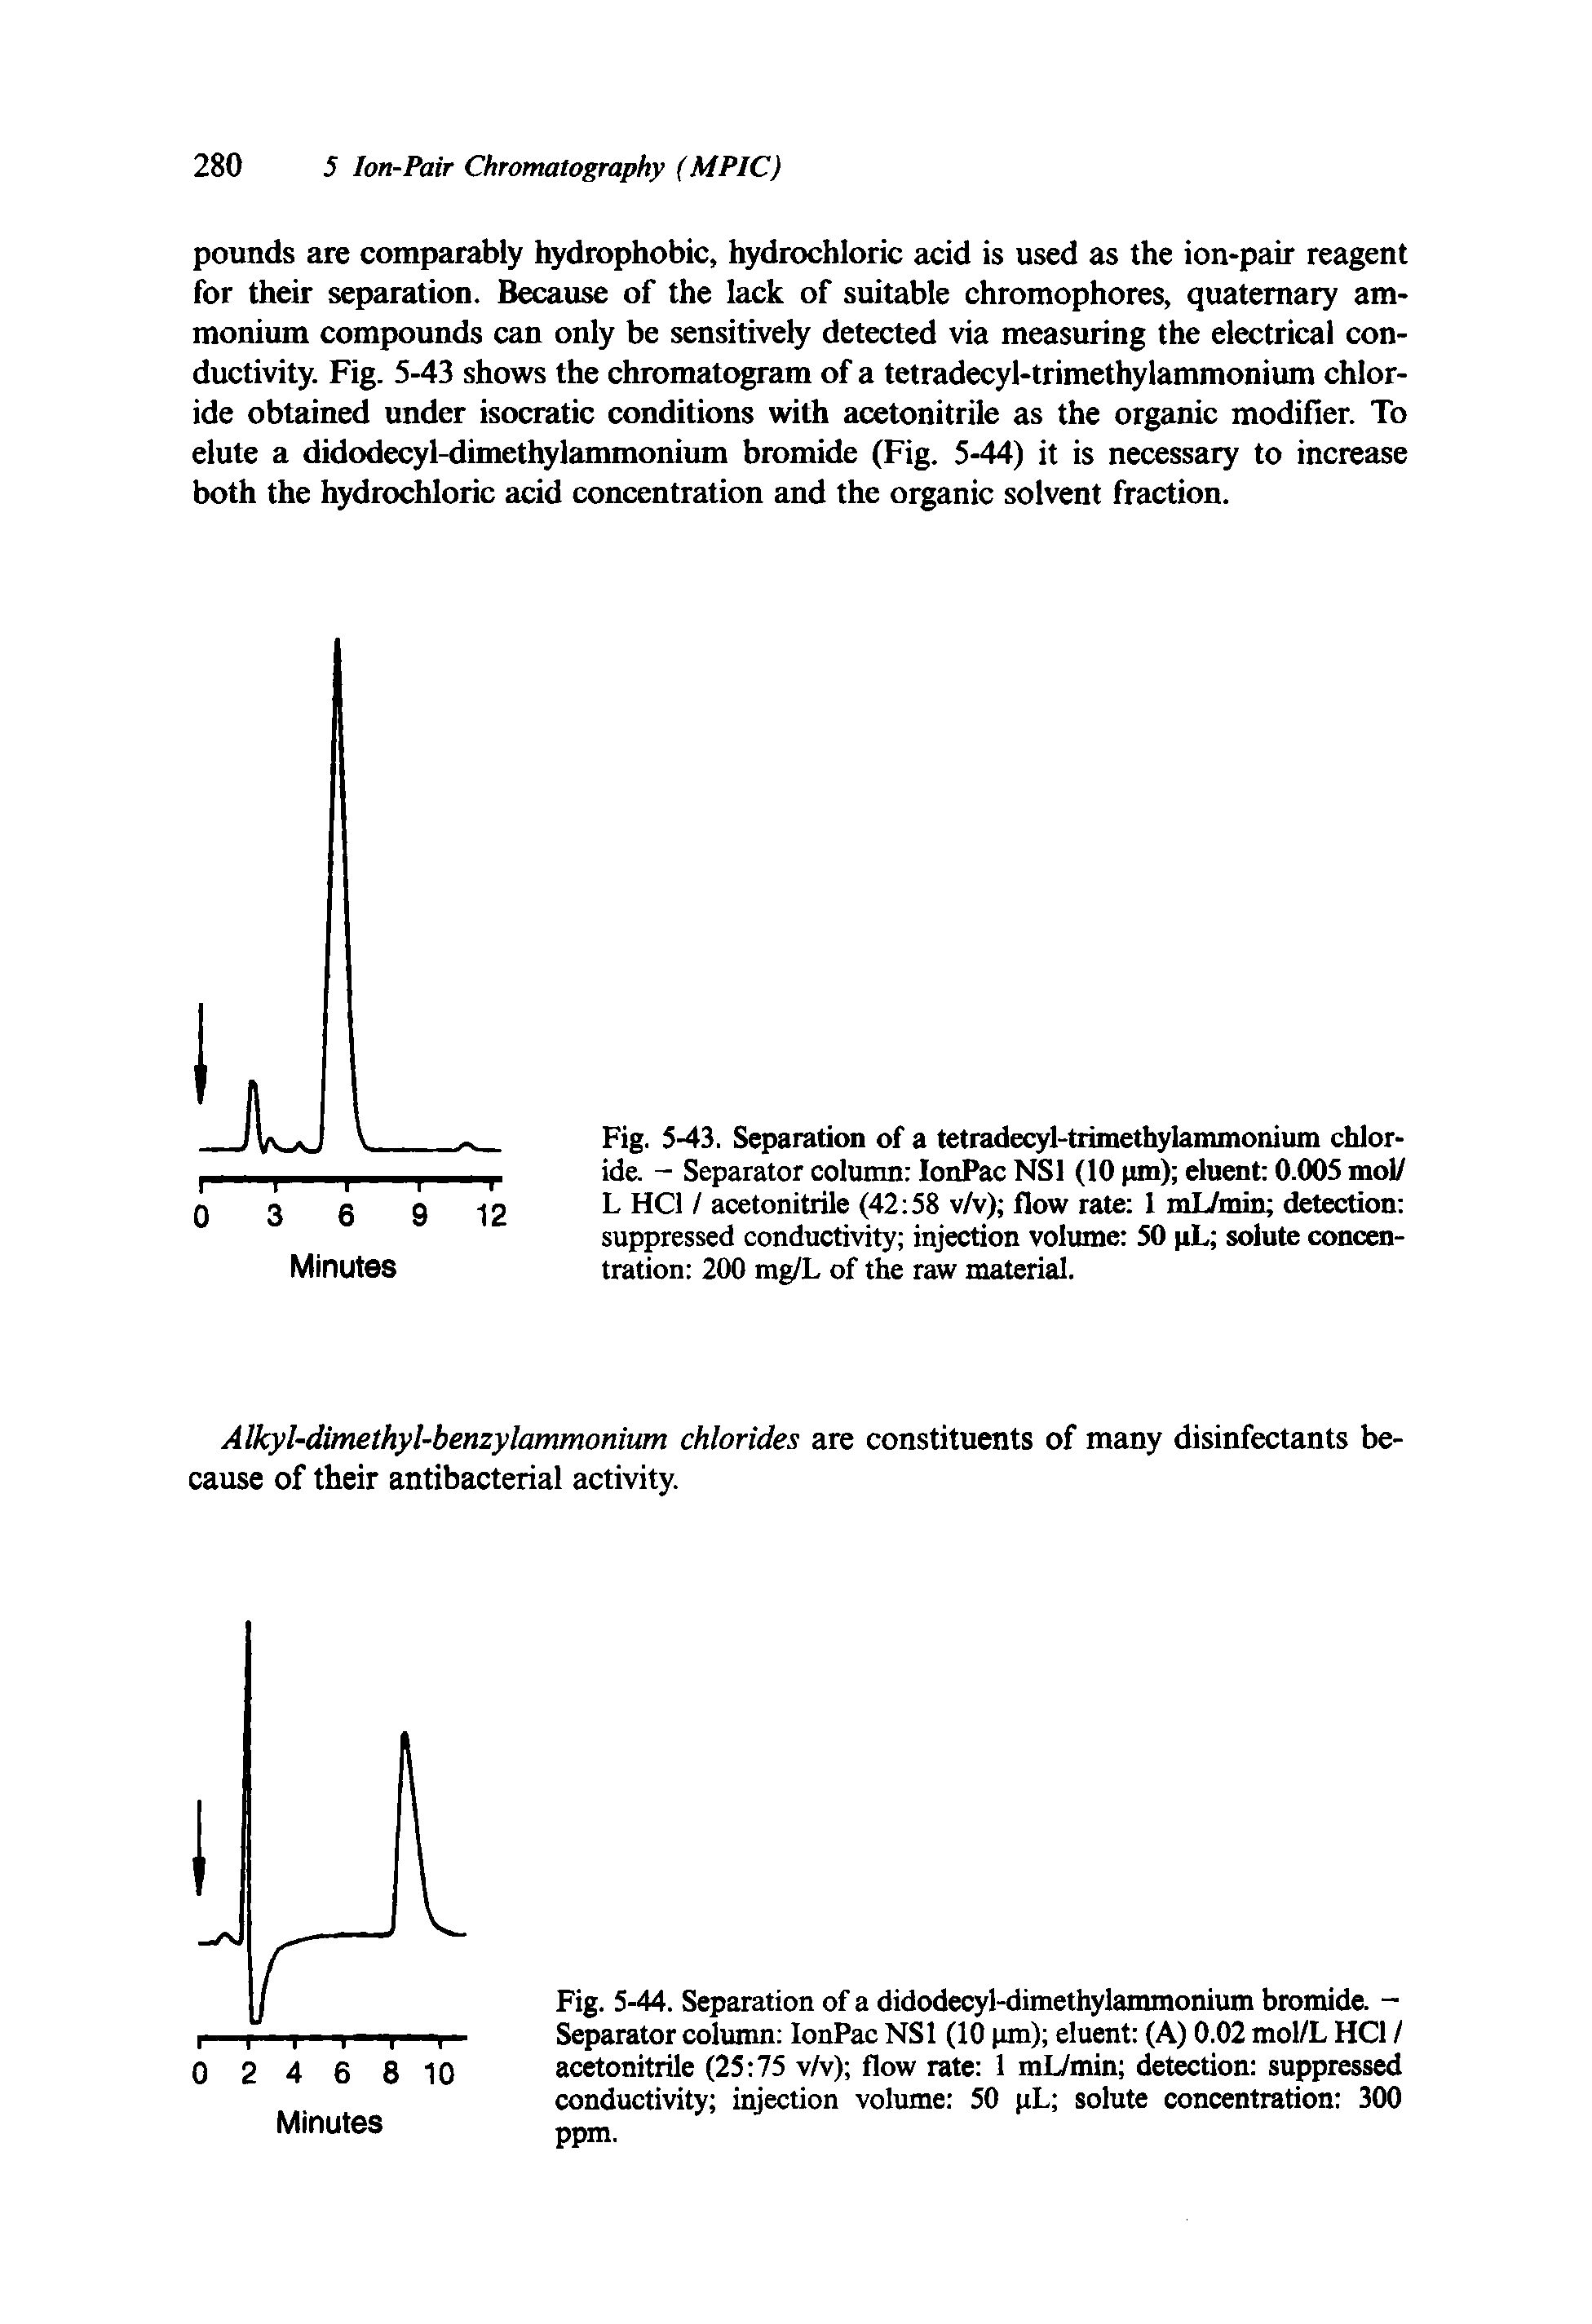 Fig. 5-44. Separation of a didodecyl-dimethylammonium bromide. -Separator column IonPac NS1 (10 pm) eluent (A) 0.02 mol/L HC1 / acetonitrile (25 75 v/v) flow rate 1 mL/min detection suppressed conductivity injection volume 50 pL solute concentration 300 ppm.